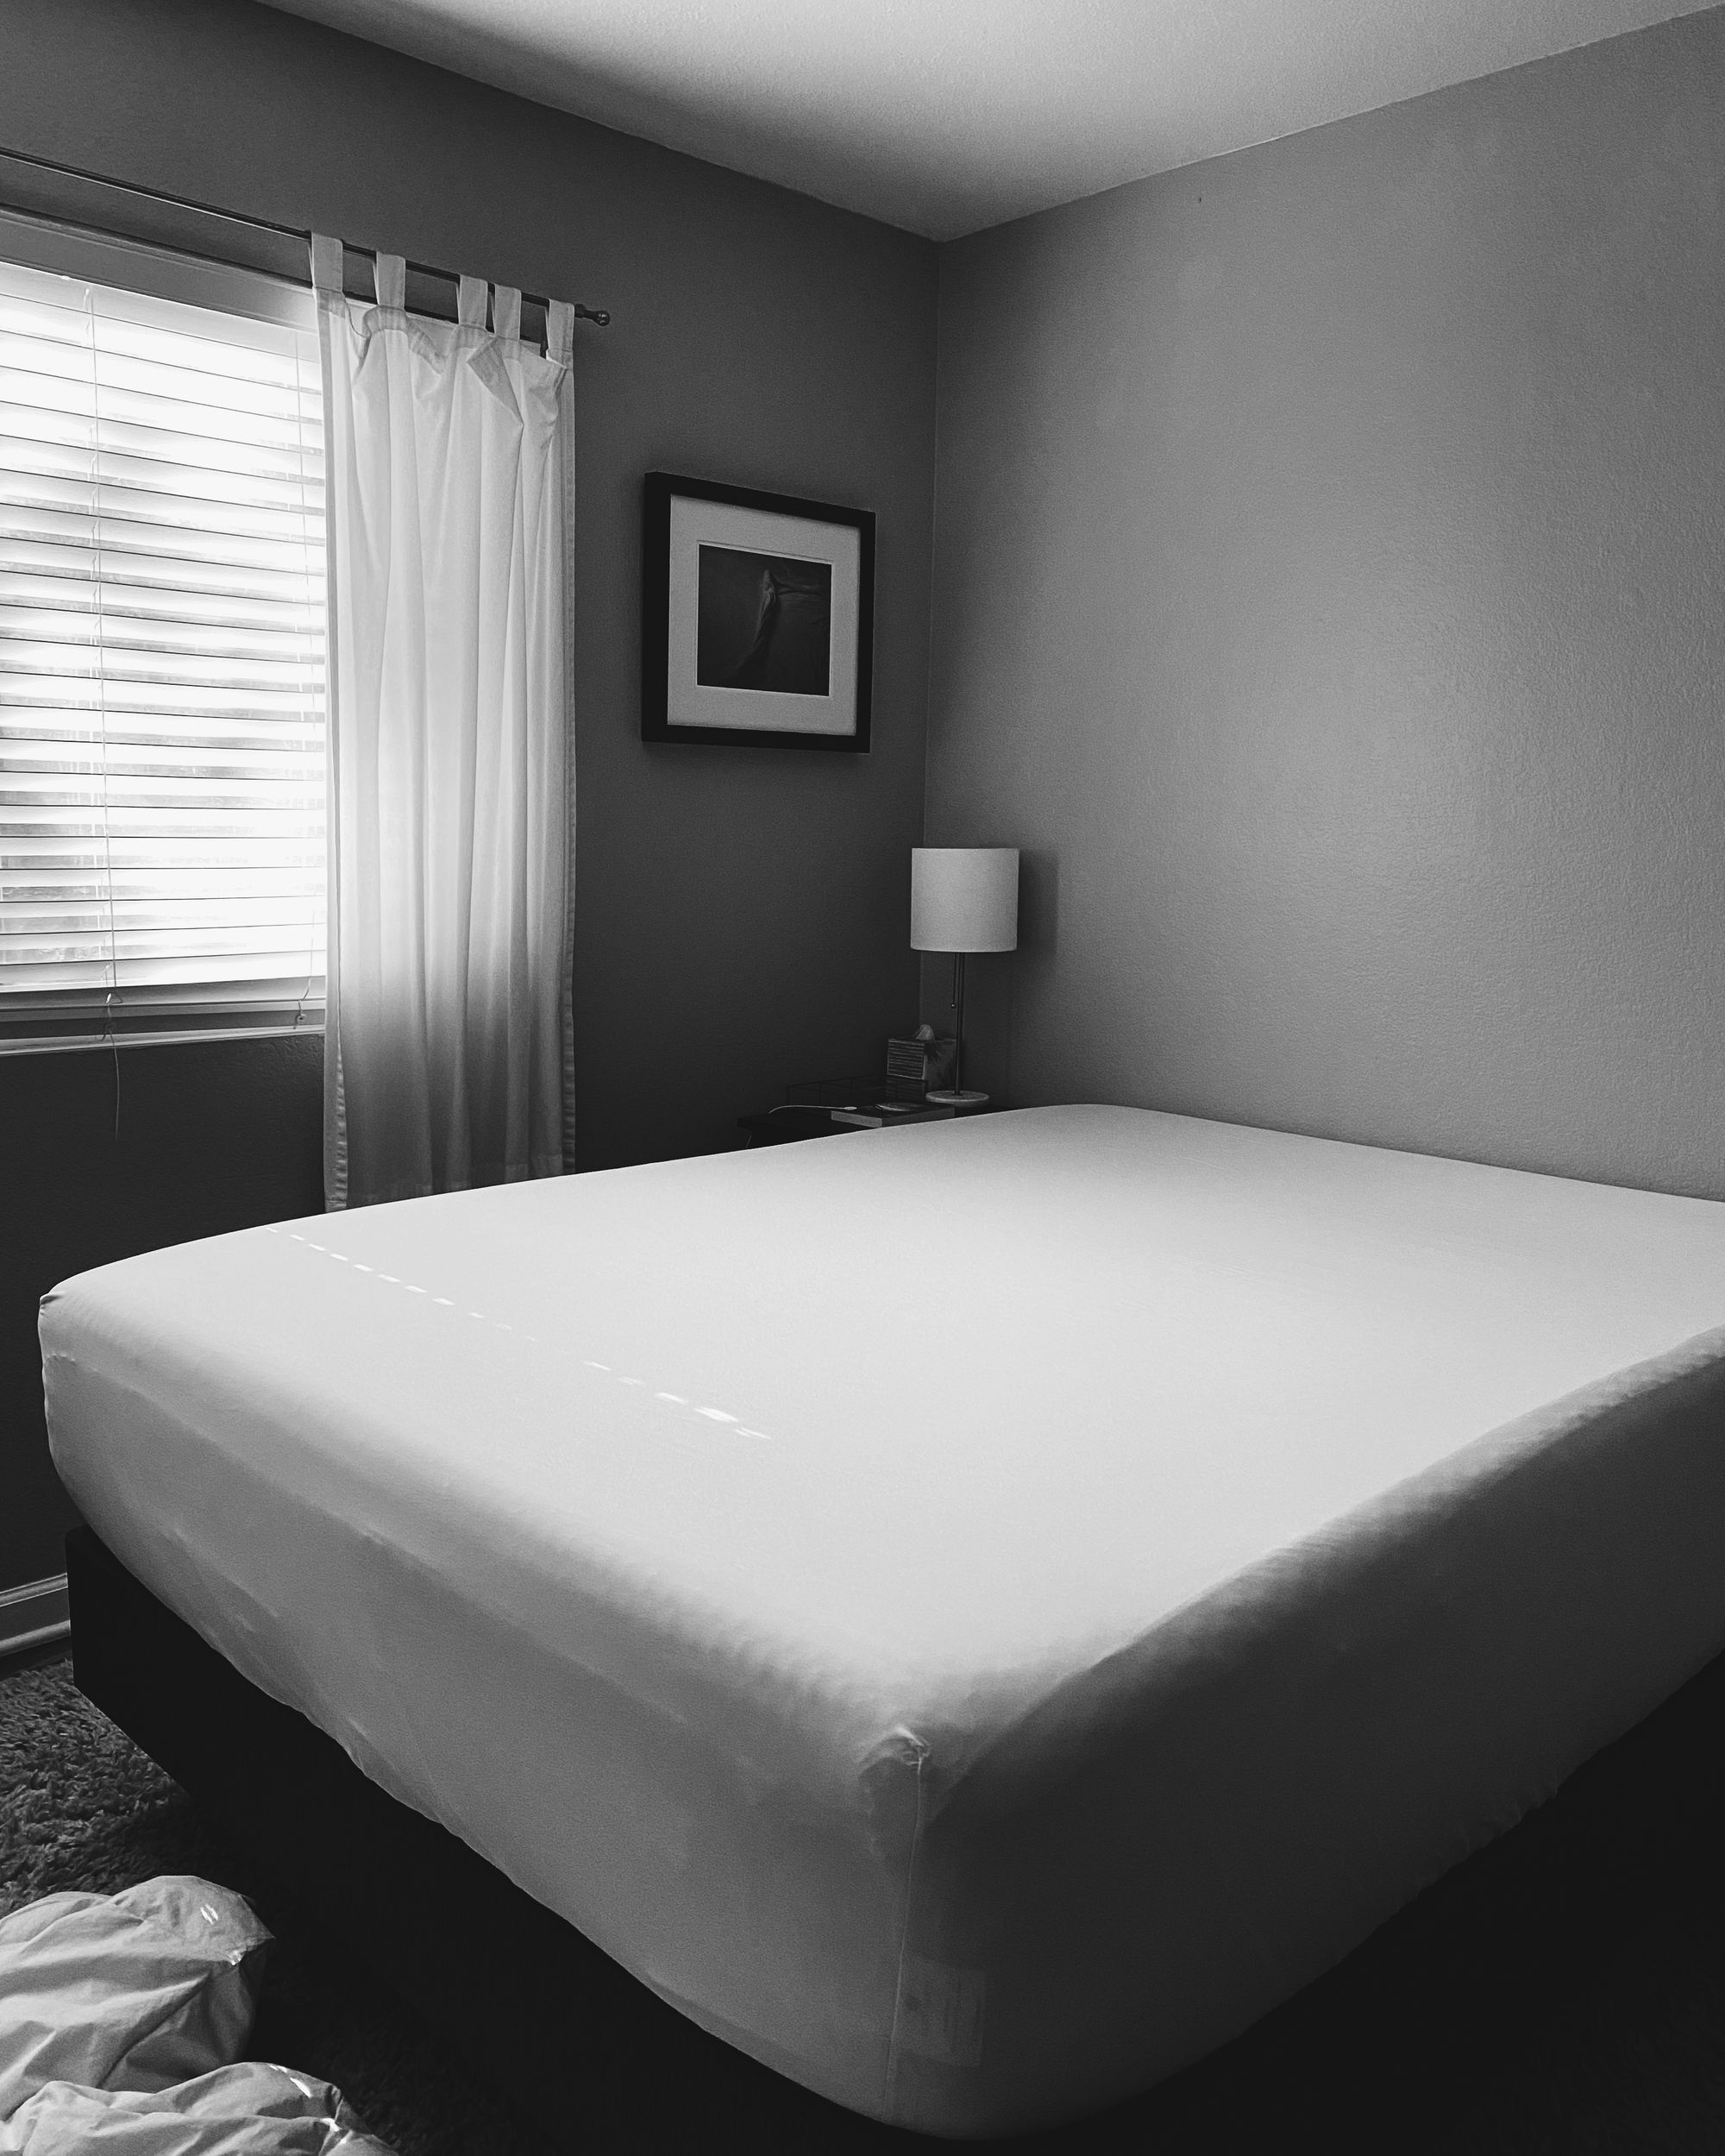 A bedroom scene in high-contrast black-and-white. In the foreground, a bed with the covers and pillows stripped off. Light shining through venetian blinds to the left. On the back wall, a framed photograph of rumpled sheets.